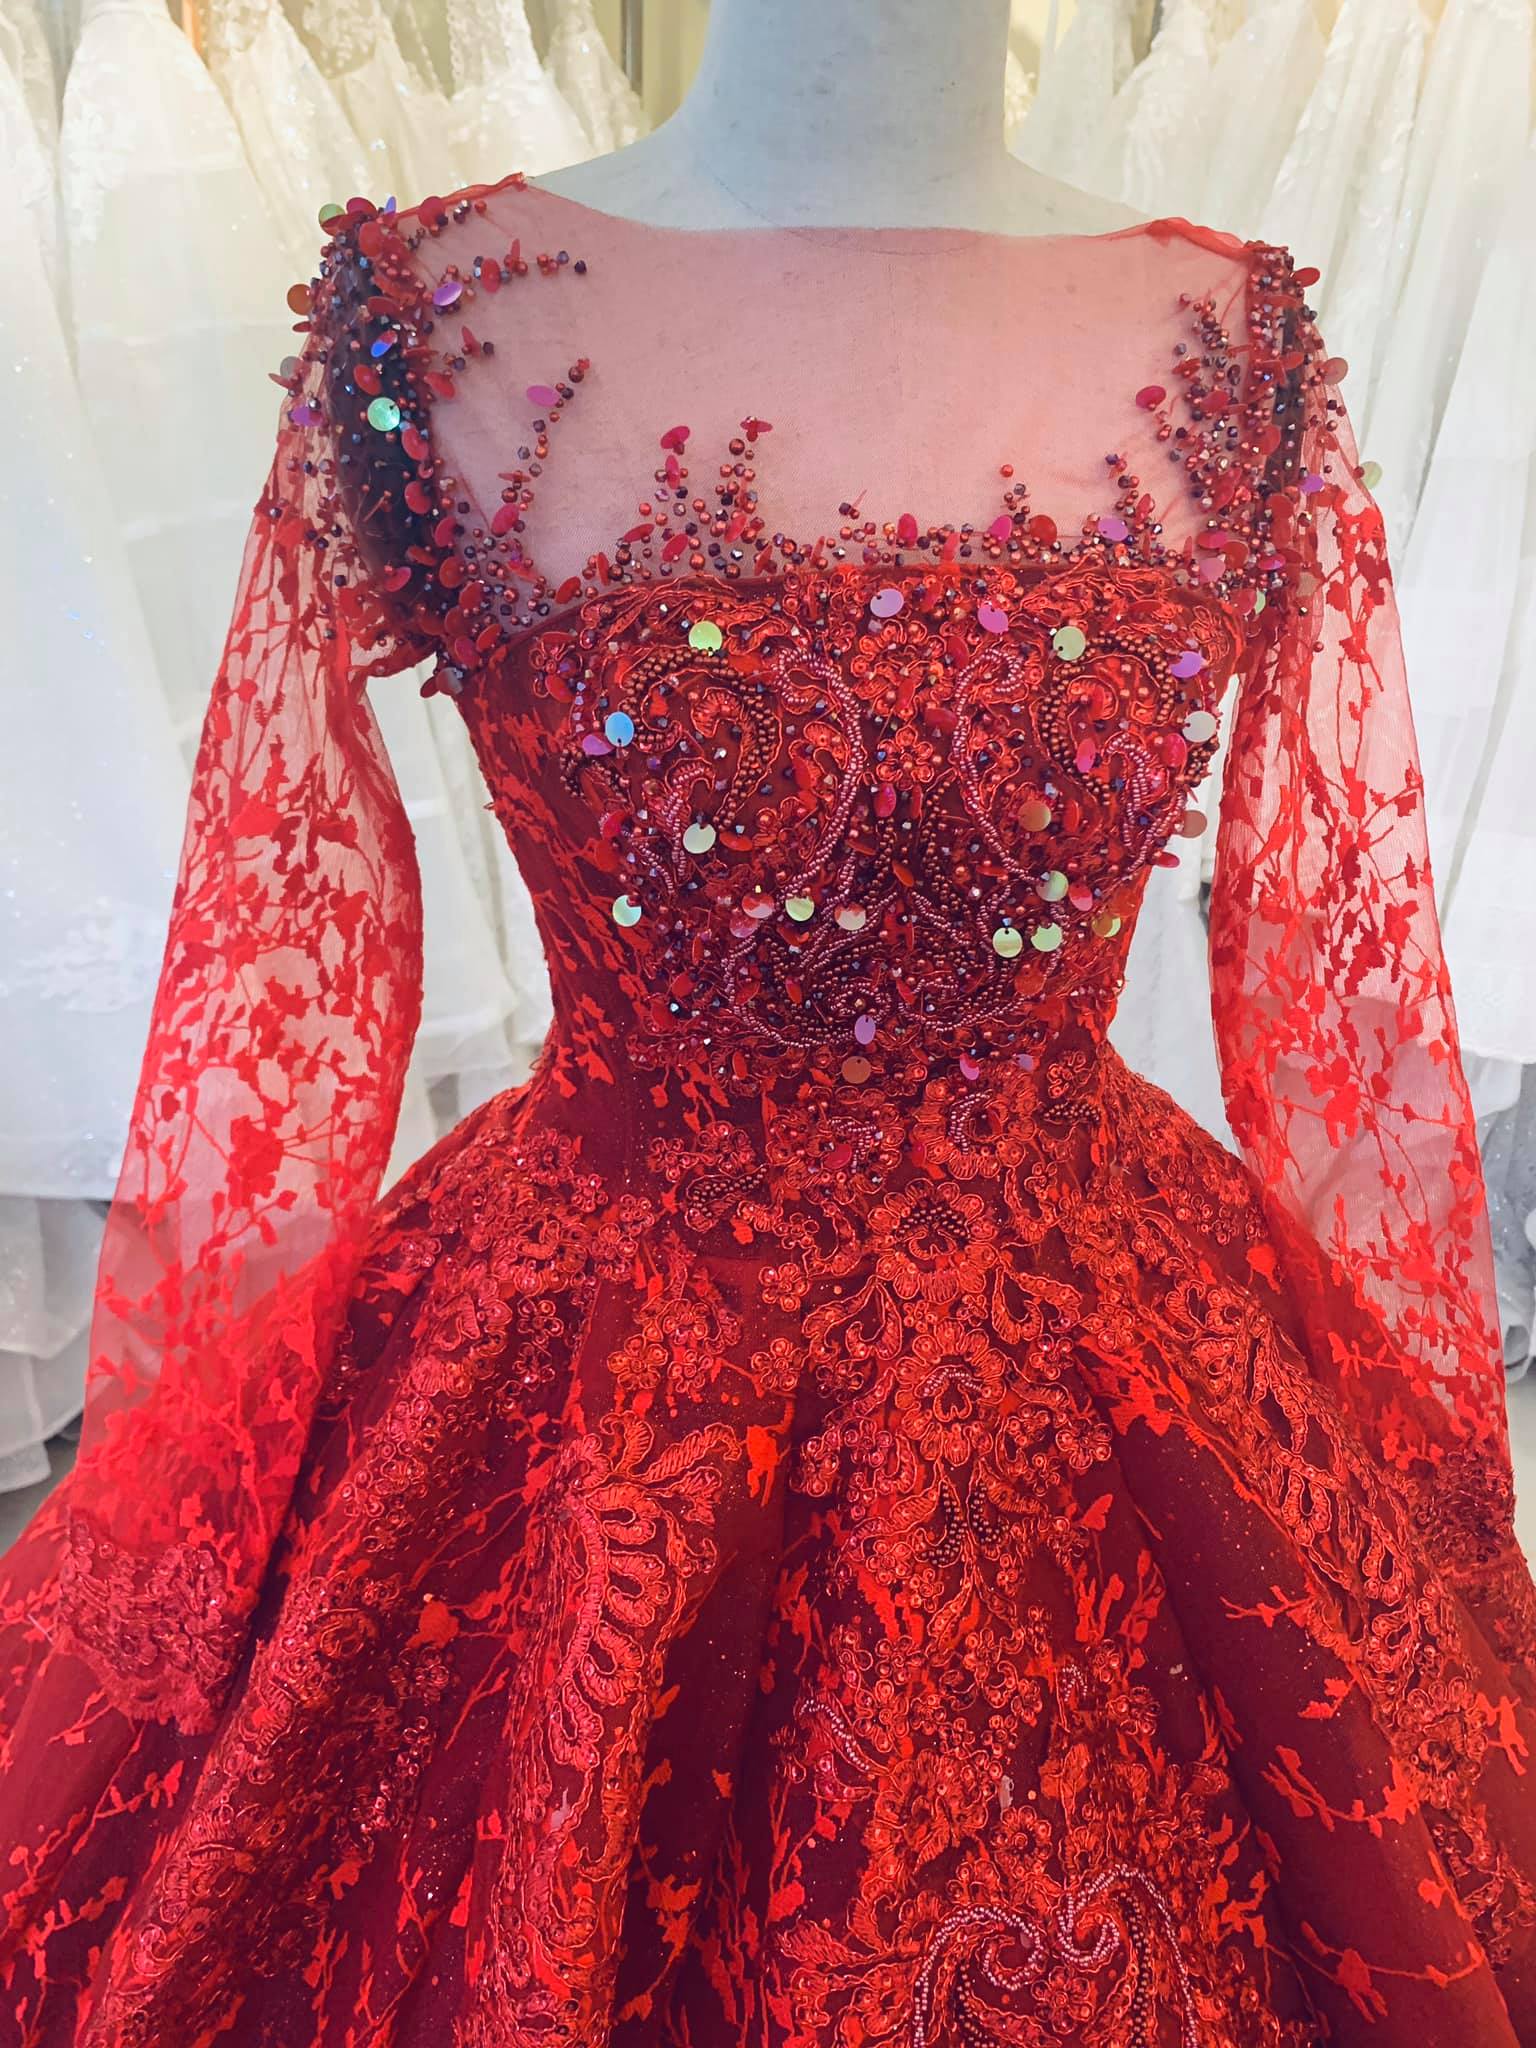 Cherry red lace applique long sleeves illusion V neck ball gown wedding  dress with chapel train - various styles